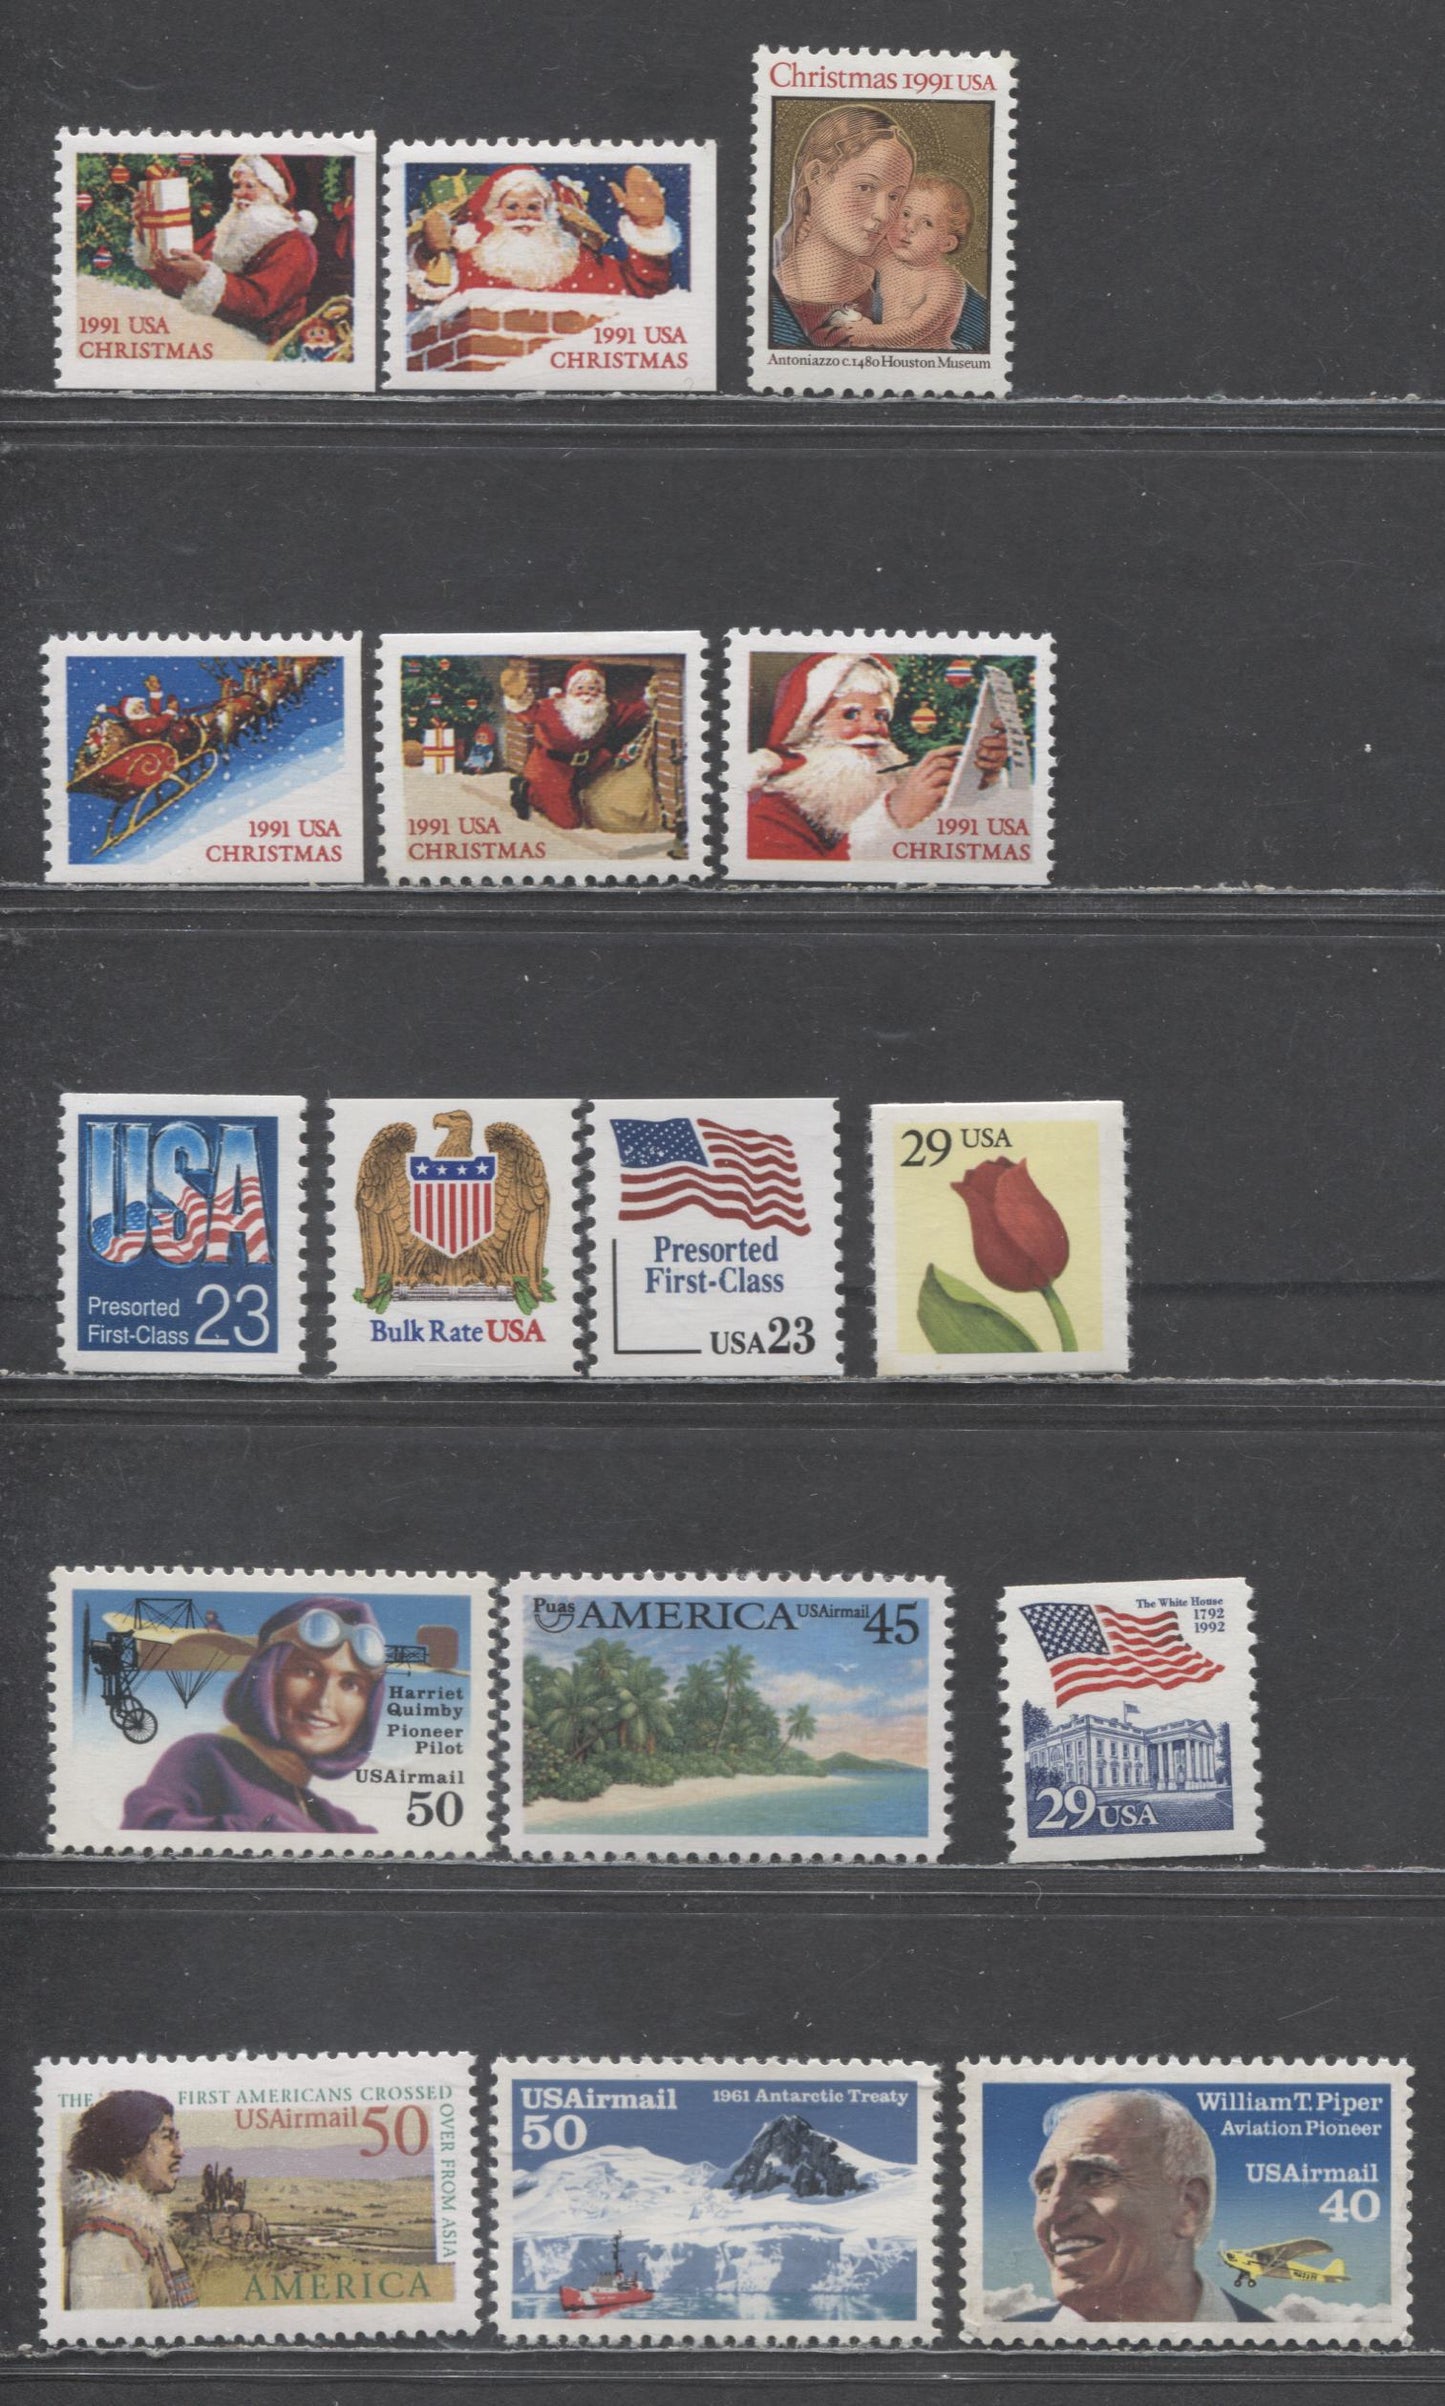 Lot 83 United States SC#2525/C131 1990-1993 Pre-Columbian America Airmails, Christmas, Flowers & Flag Issues, 16 VFNH Singles, Click on Listing to See ALL Pictures, 2017 Scott Cat. $14